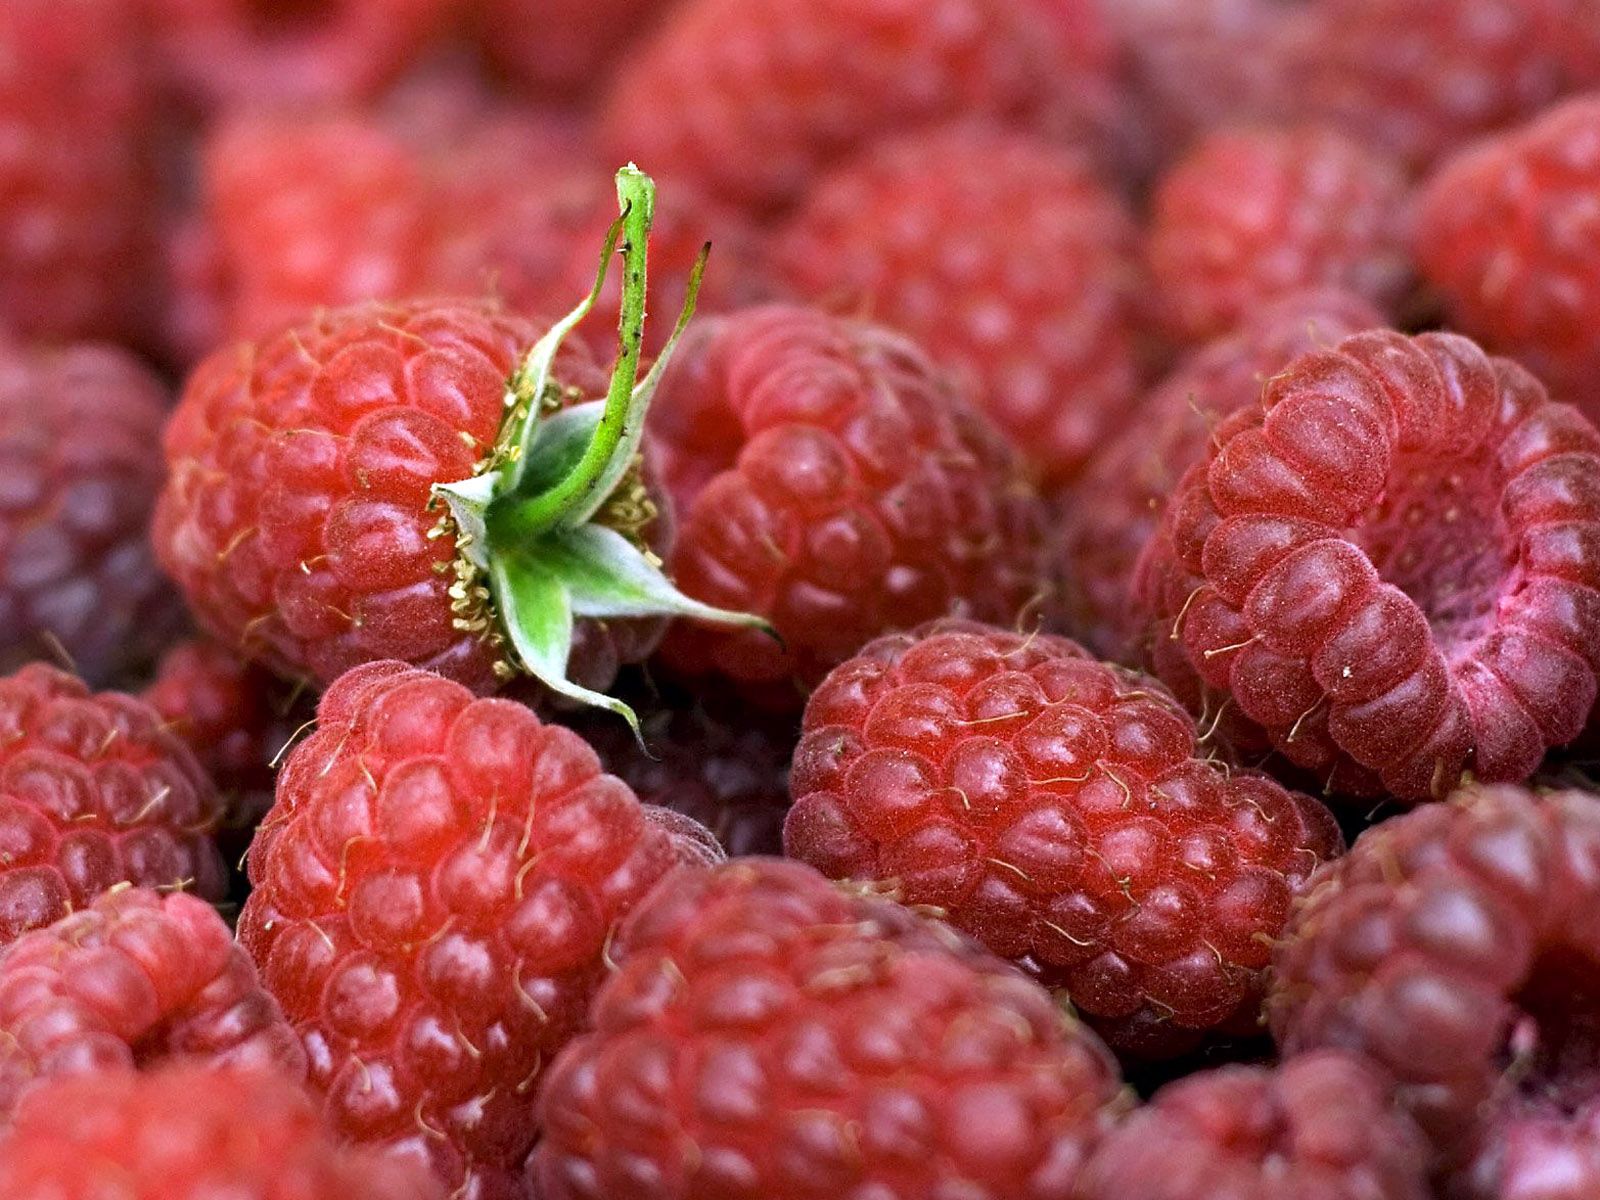 140989 download wallpaper leaves, food, raspberry, berries, ripe screensavers and pictures for free